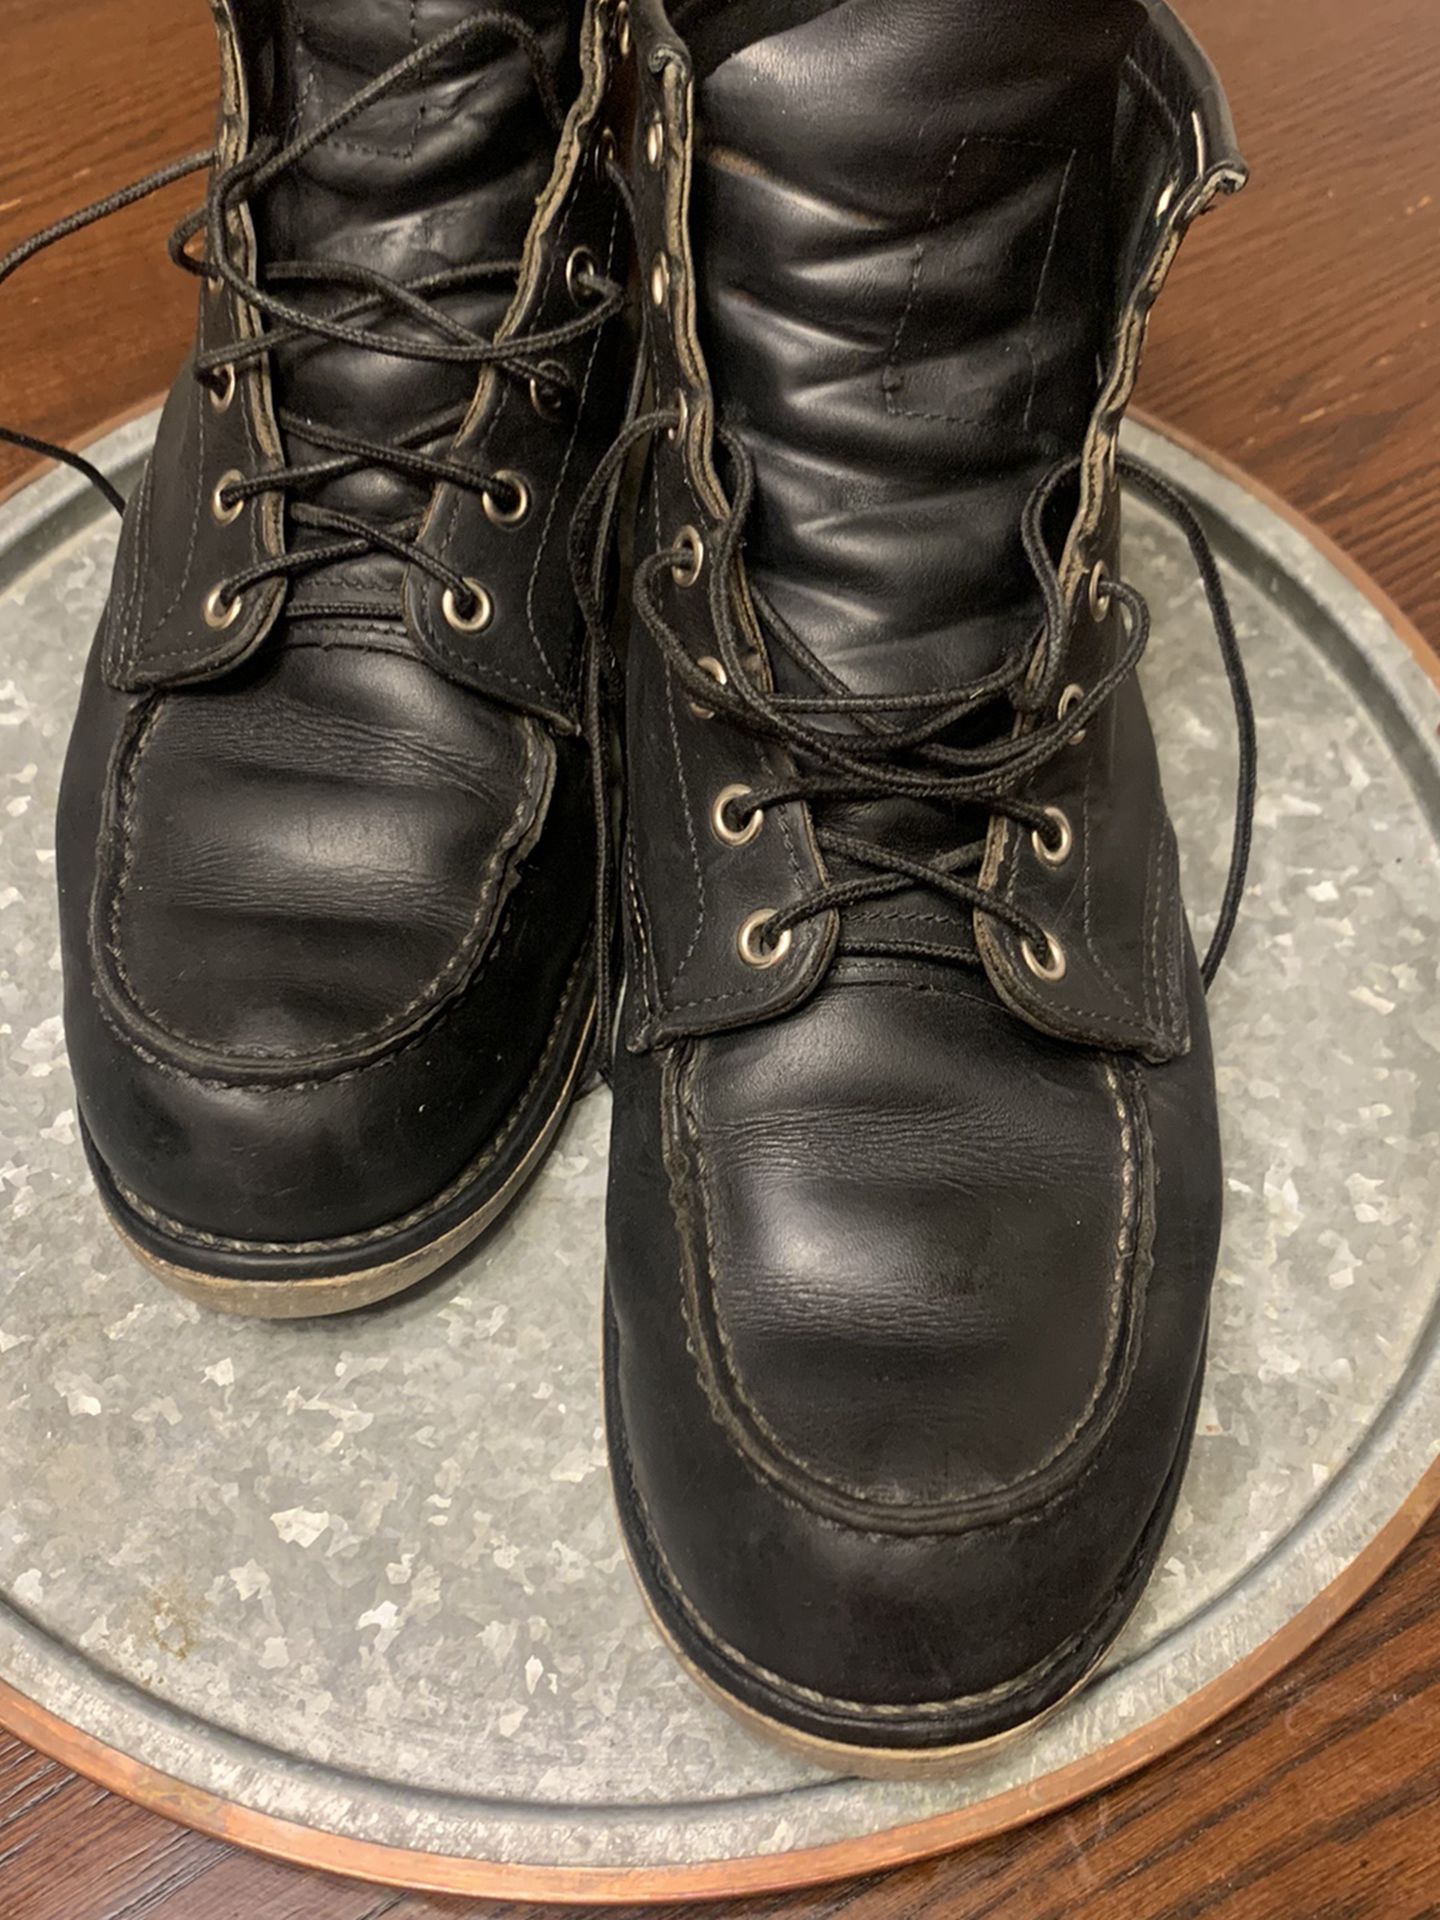 Red Wing Moc Toe Black harness 9075 Size 11